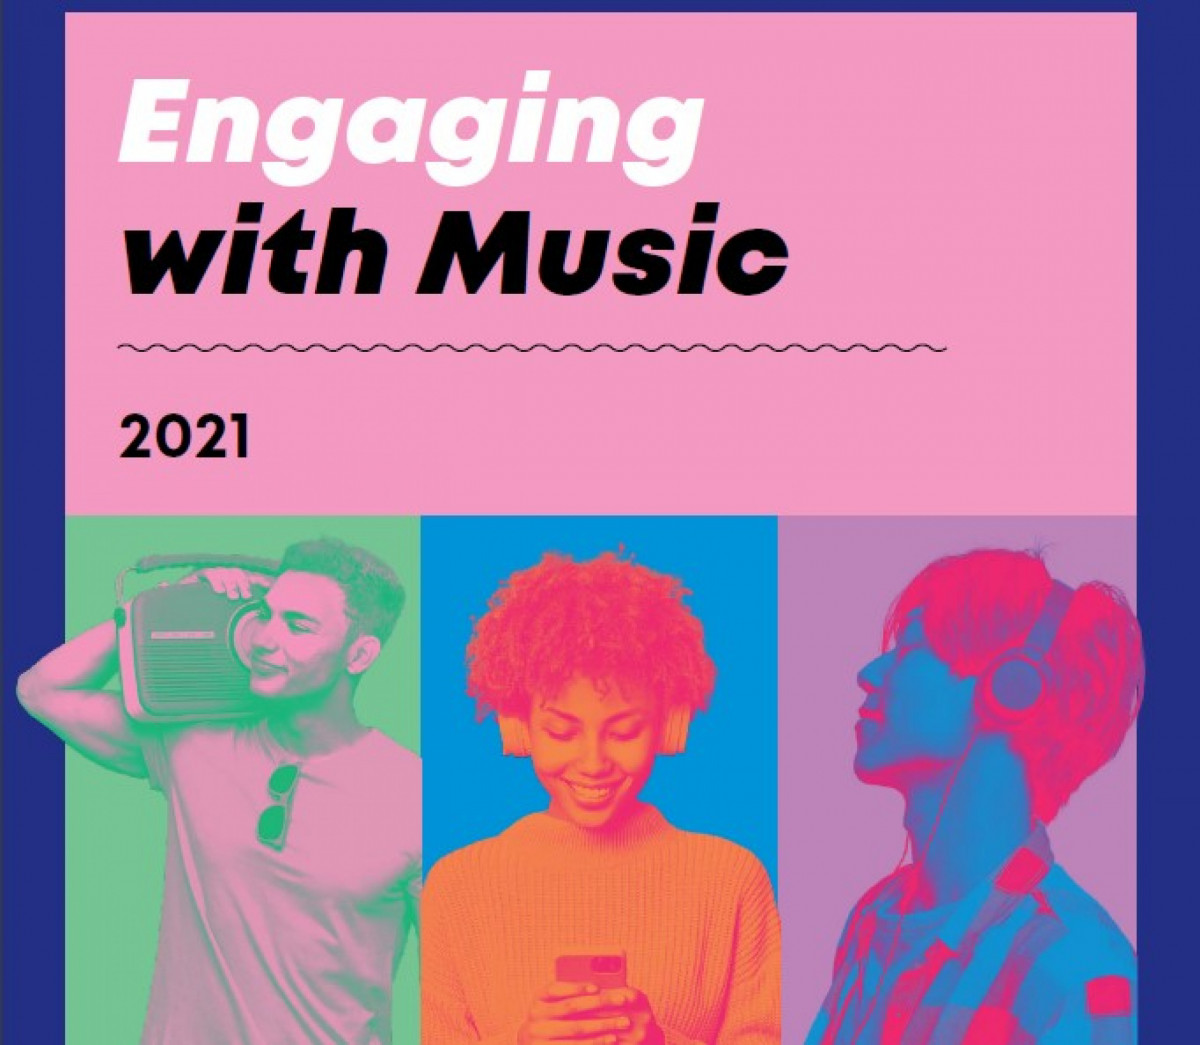 Engaging with Music 2021